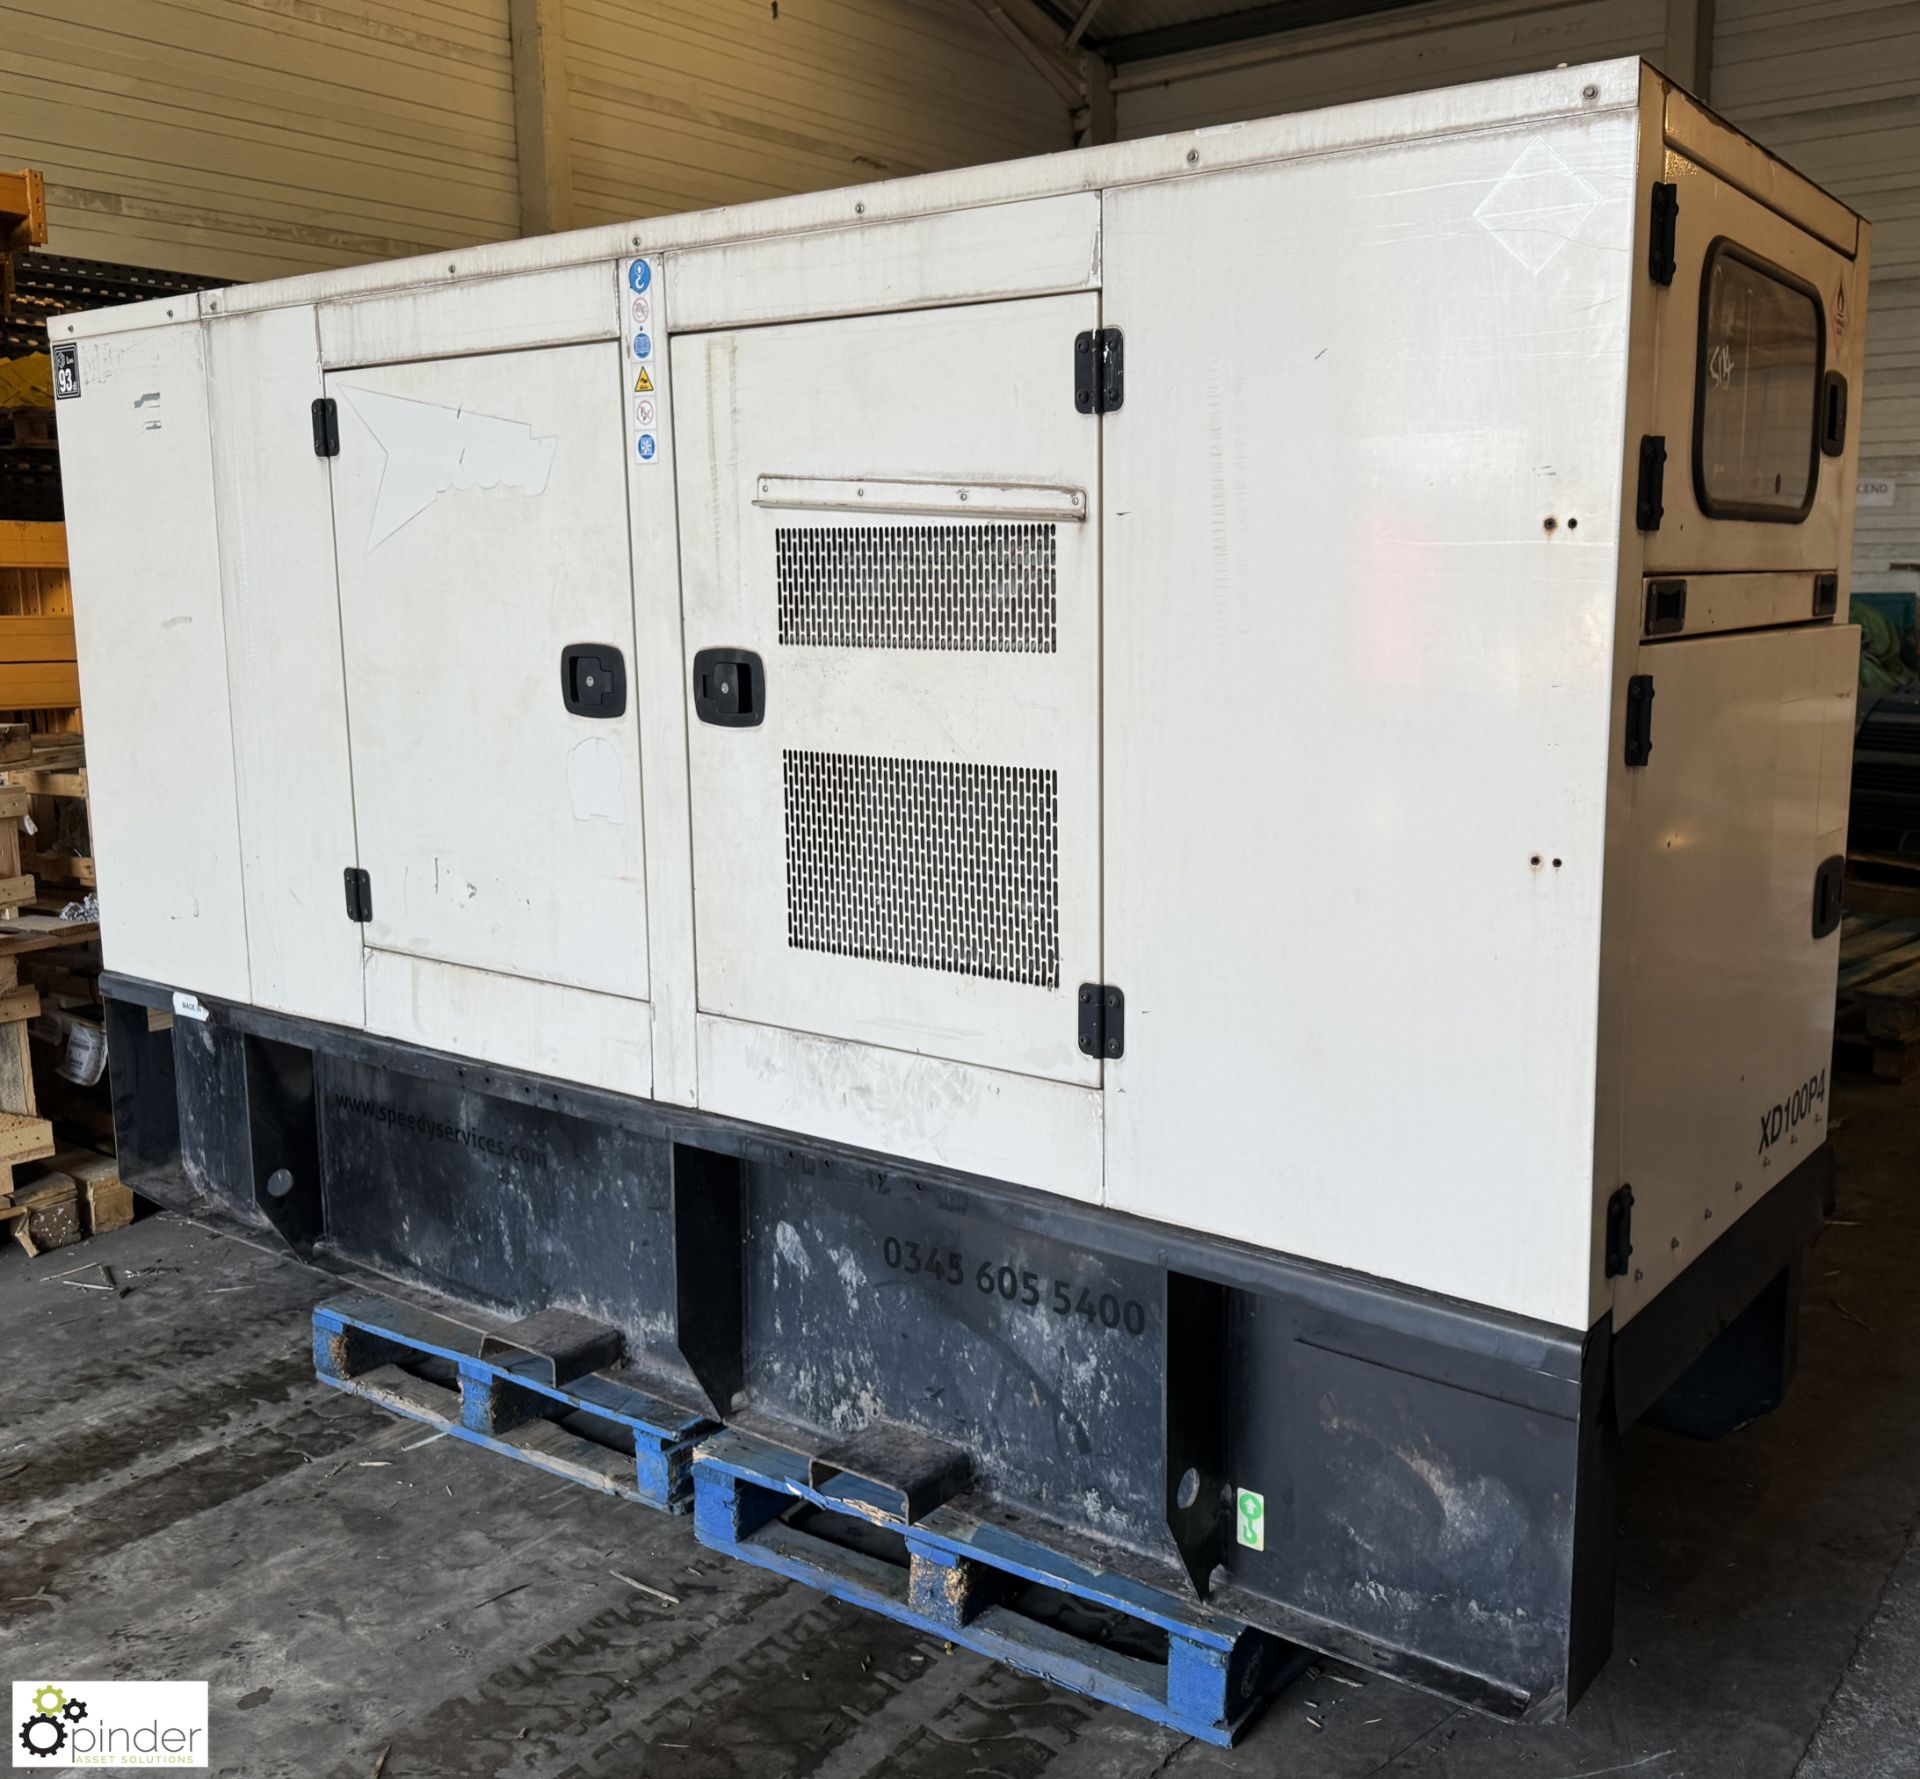 FG Wilson XD100 P4 skid mounted Generator, 100kva, 3 x 415volts outlets, 3 x 240volts outlets, Leroy - Image 3 of 13